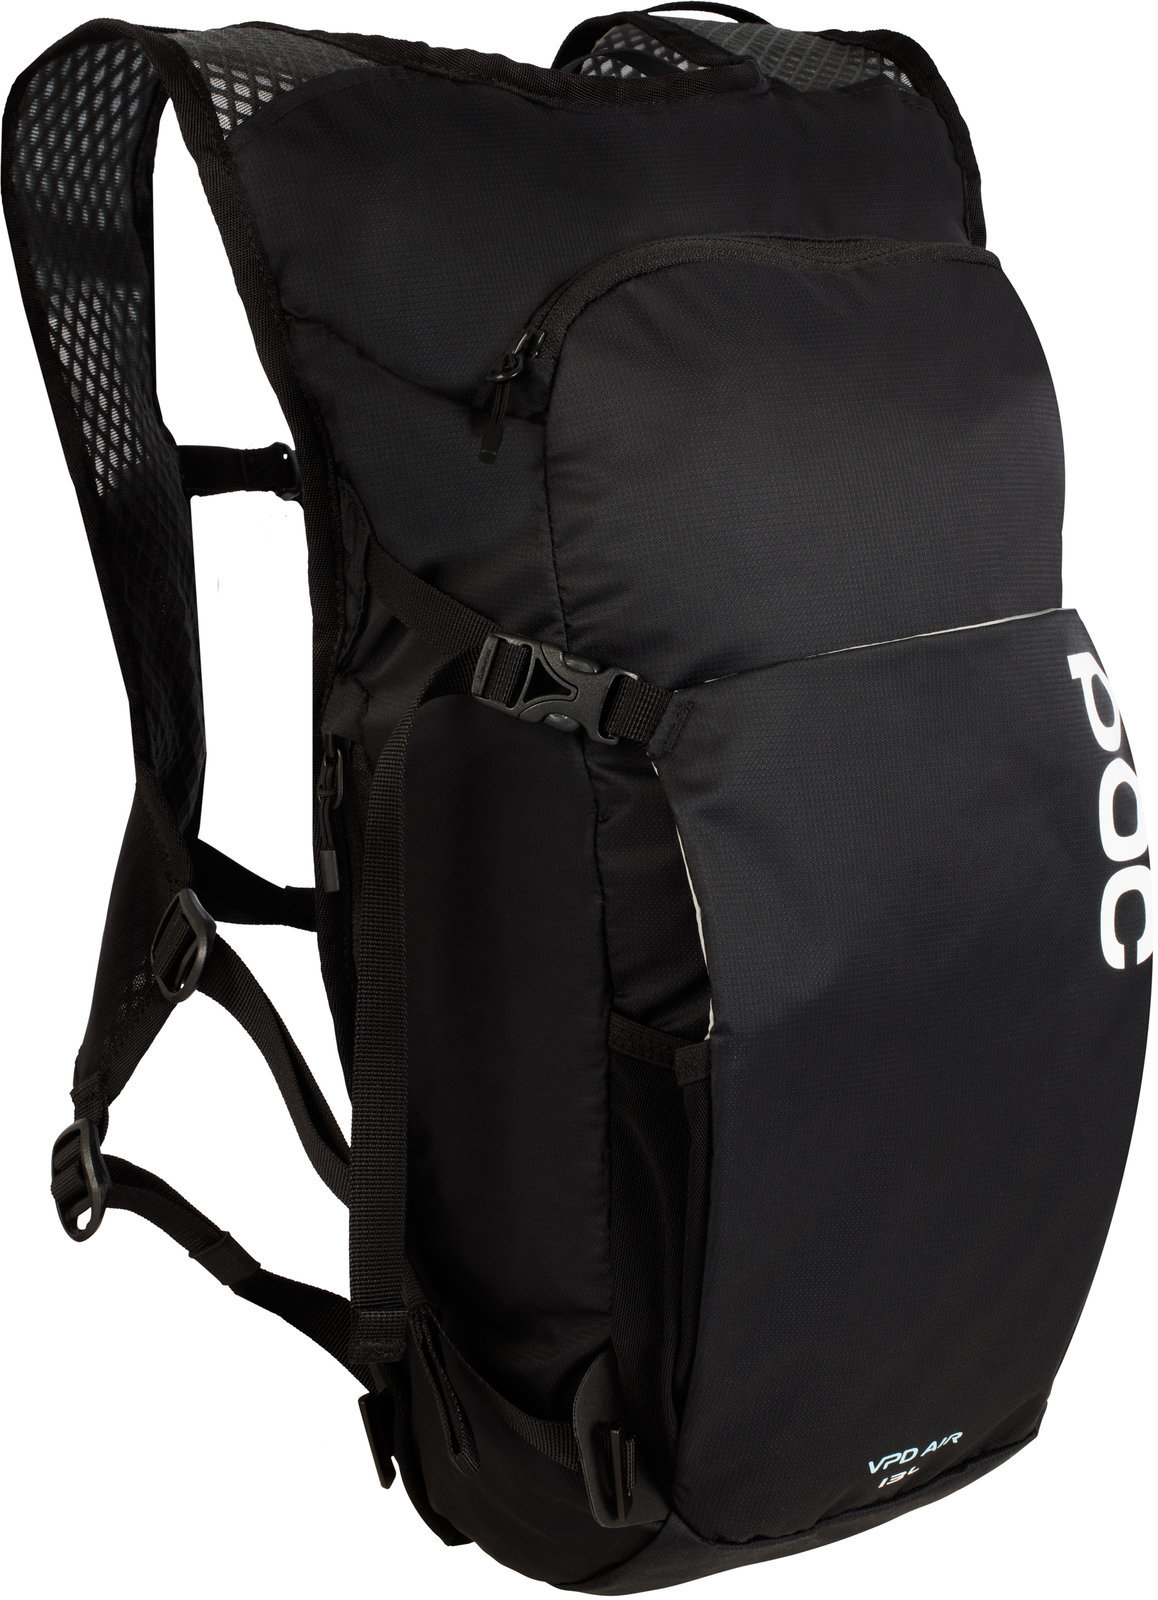 Cycling backpack and accessories POC Spine VPD Air Uranium Black Backpack